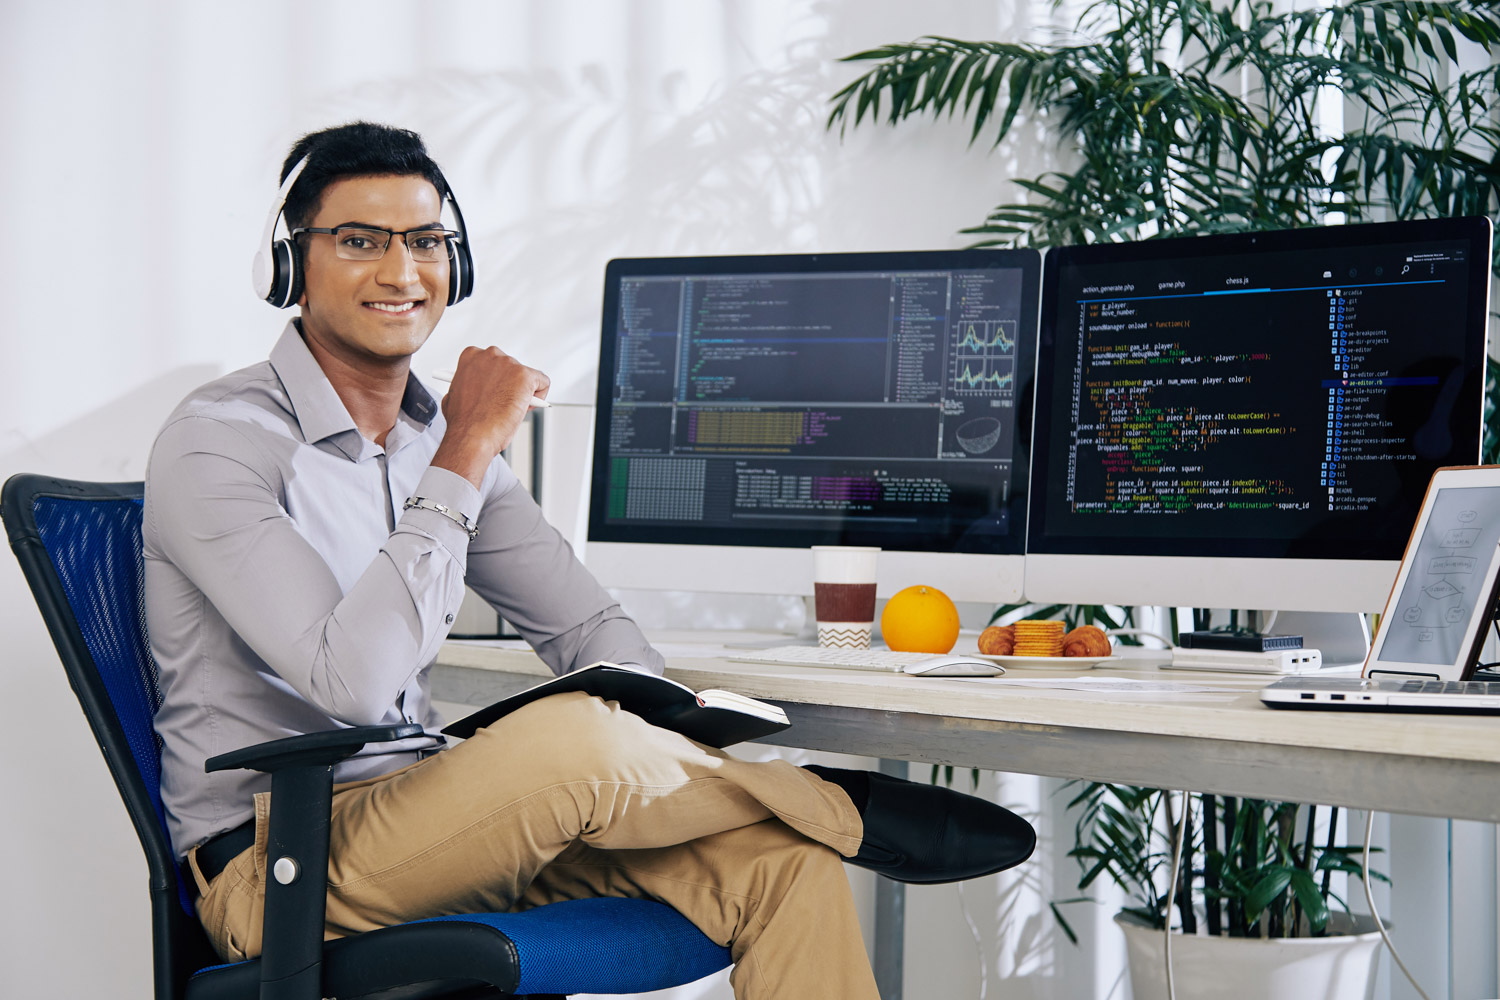 Man sitting at computer with two screens, wearing a headset, looking at camera.